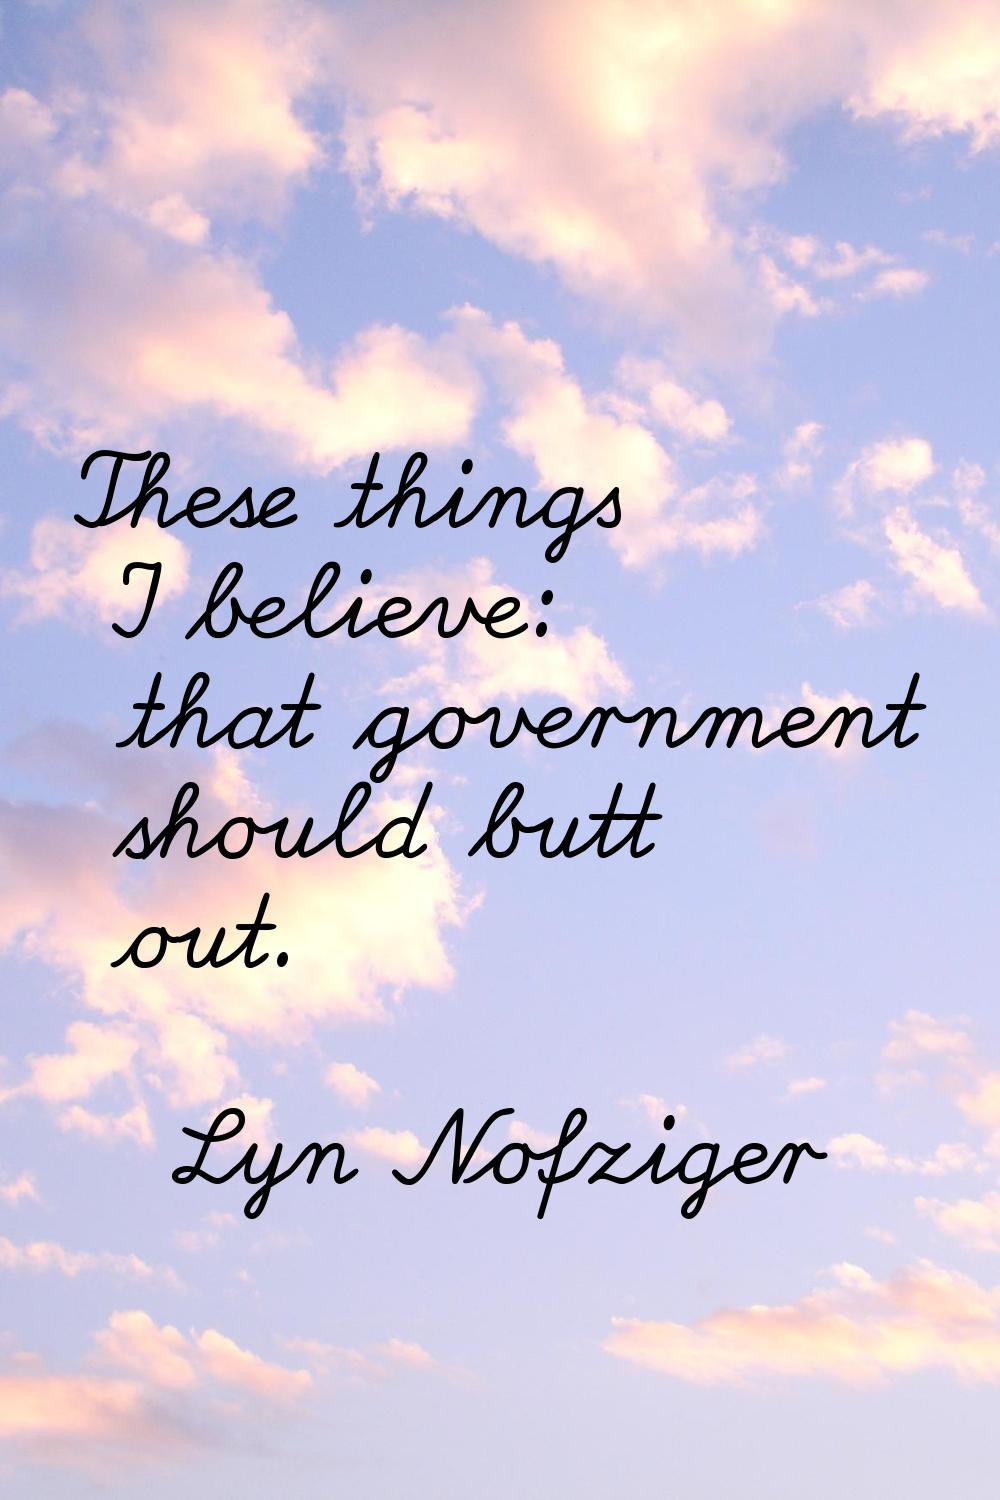 These things I believe: that government should butt out.